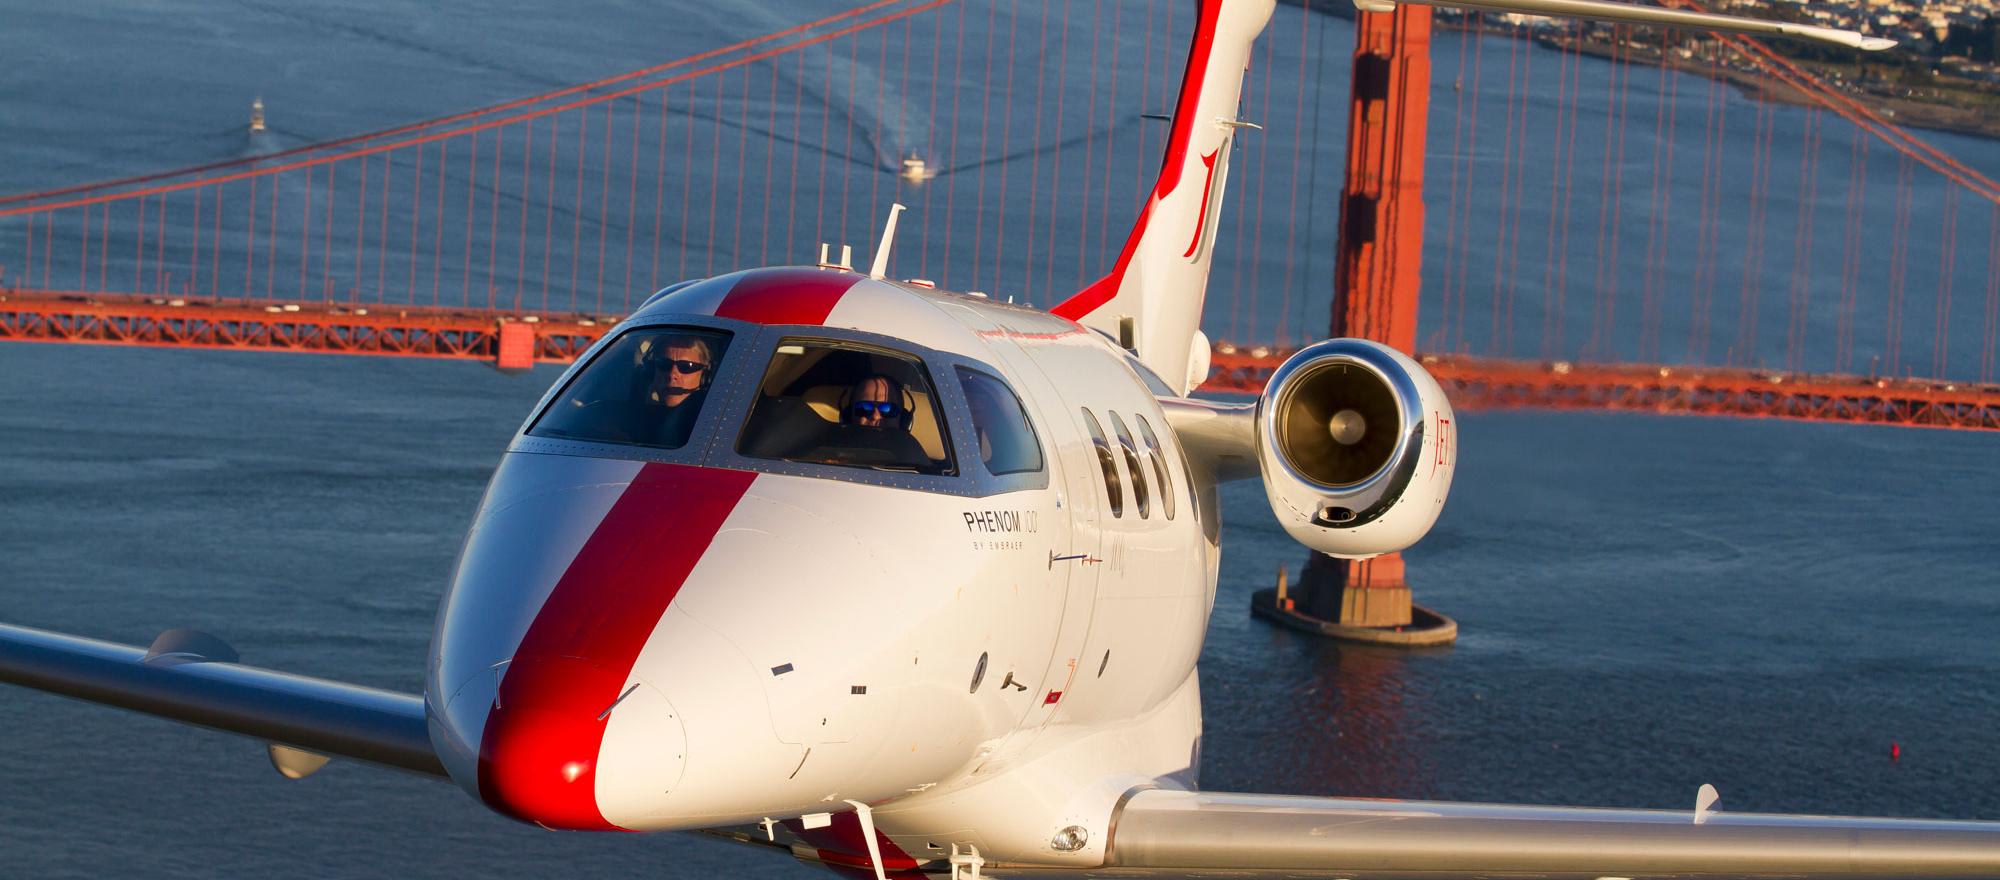 Citing the downturn in business aircraft flying due to Covid-19, Dallas-based charter operator JetSuite has grounded its fleet of distictive red-striped Embraer Phenom 100s and 300s and furloughed most of its crewmembers. (Photo: JetSuite)